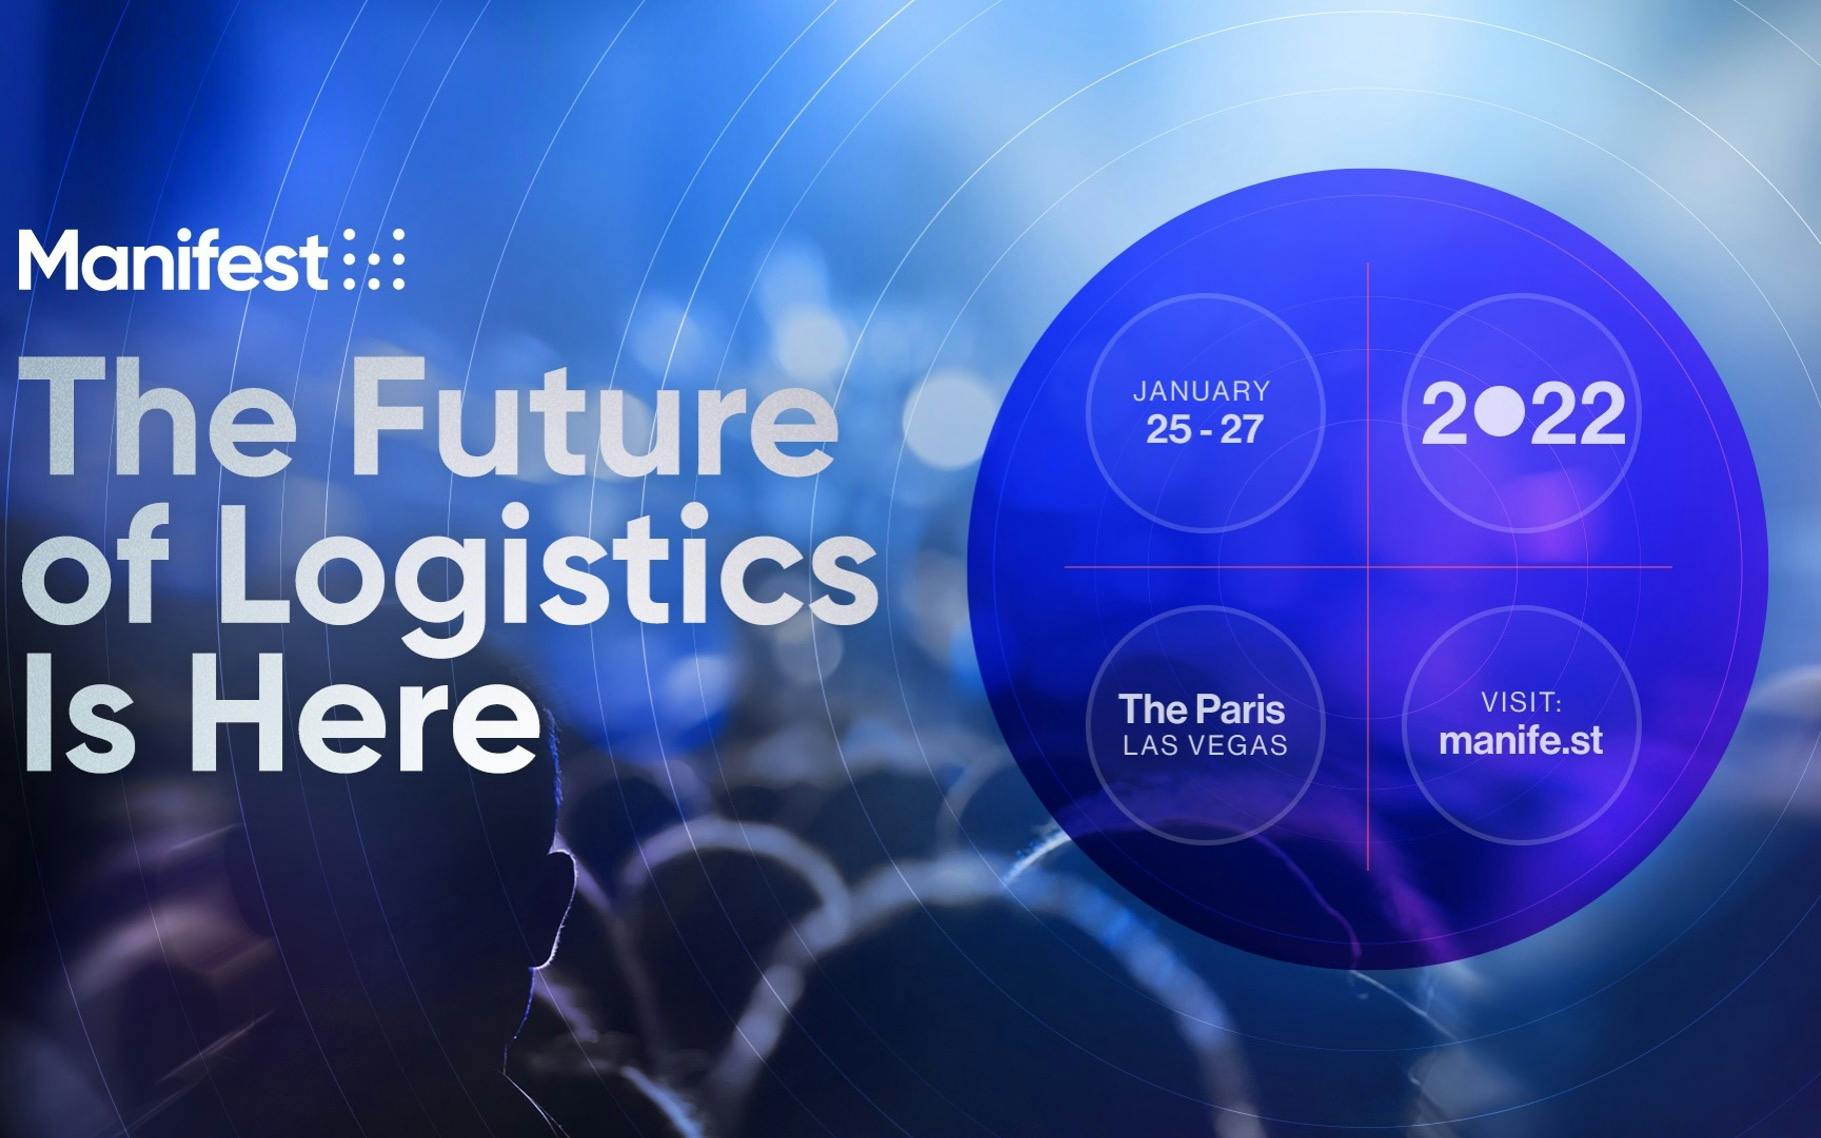 Manifest: The Future of Logistics is Here 2022